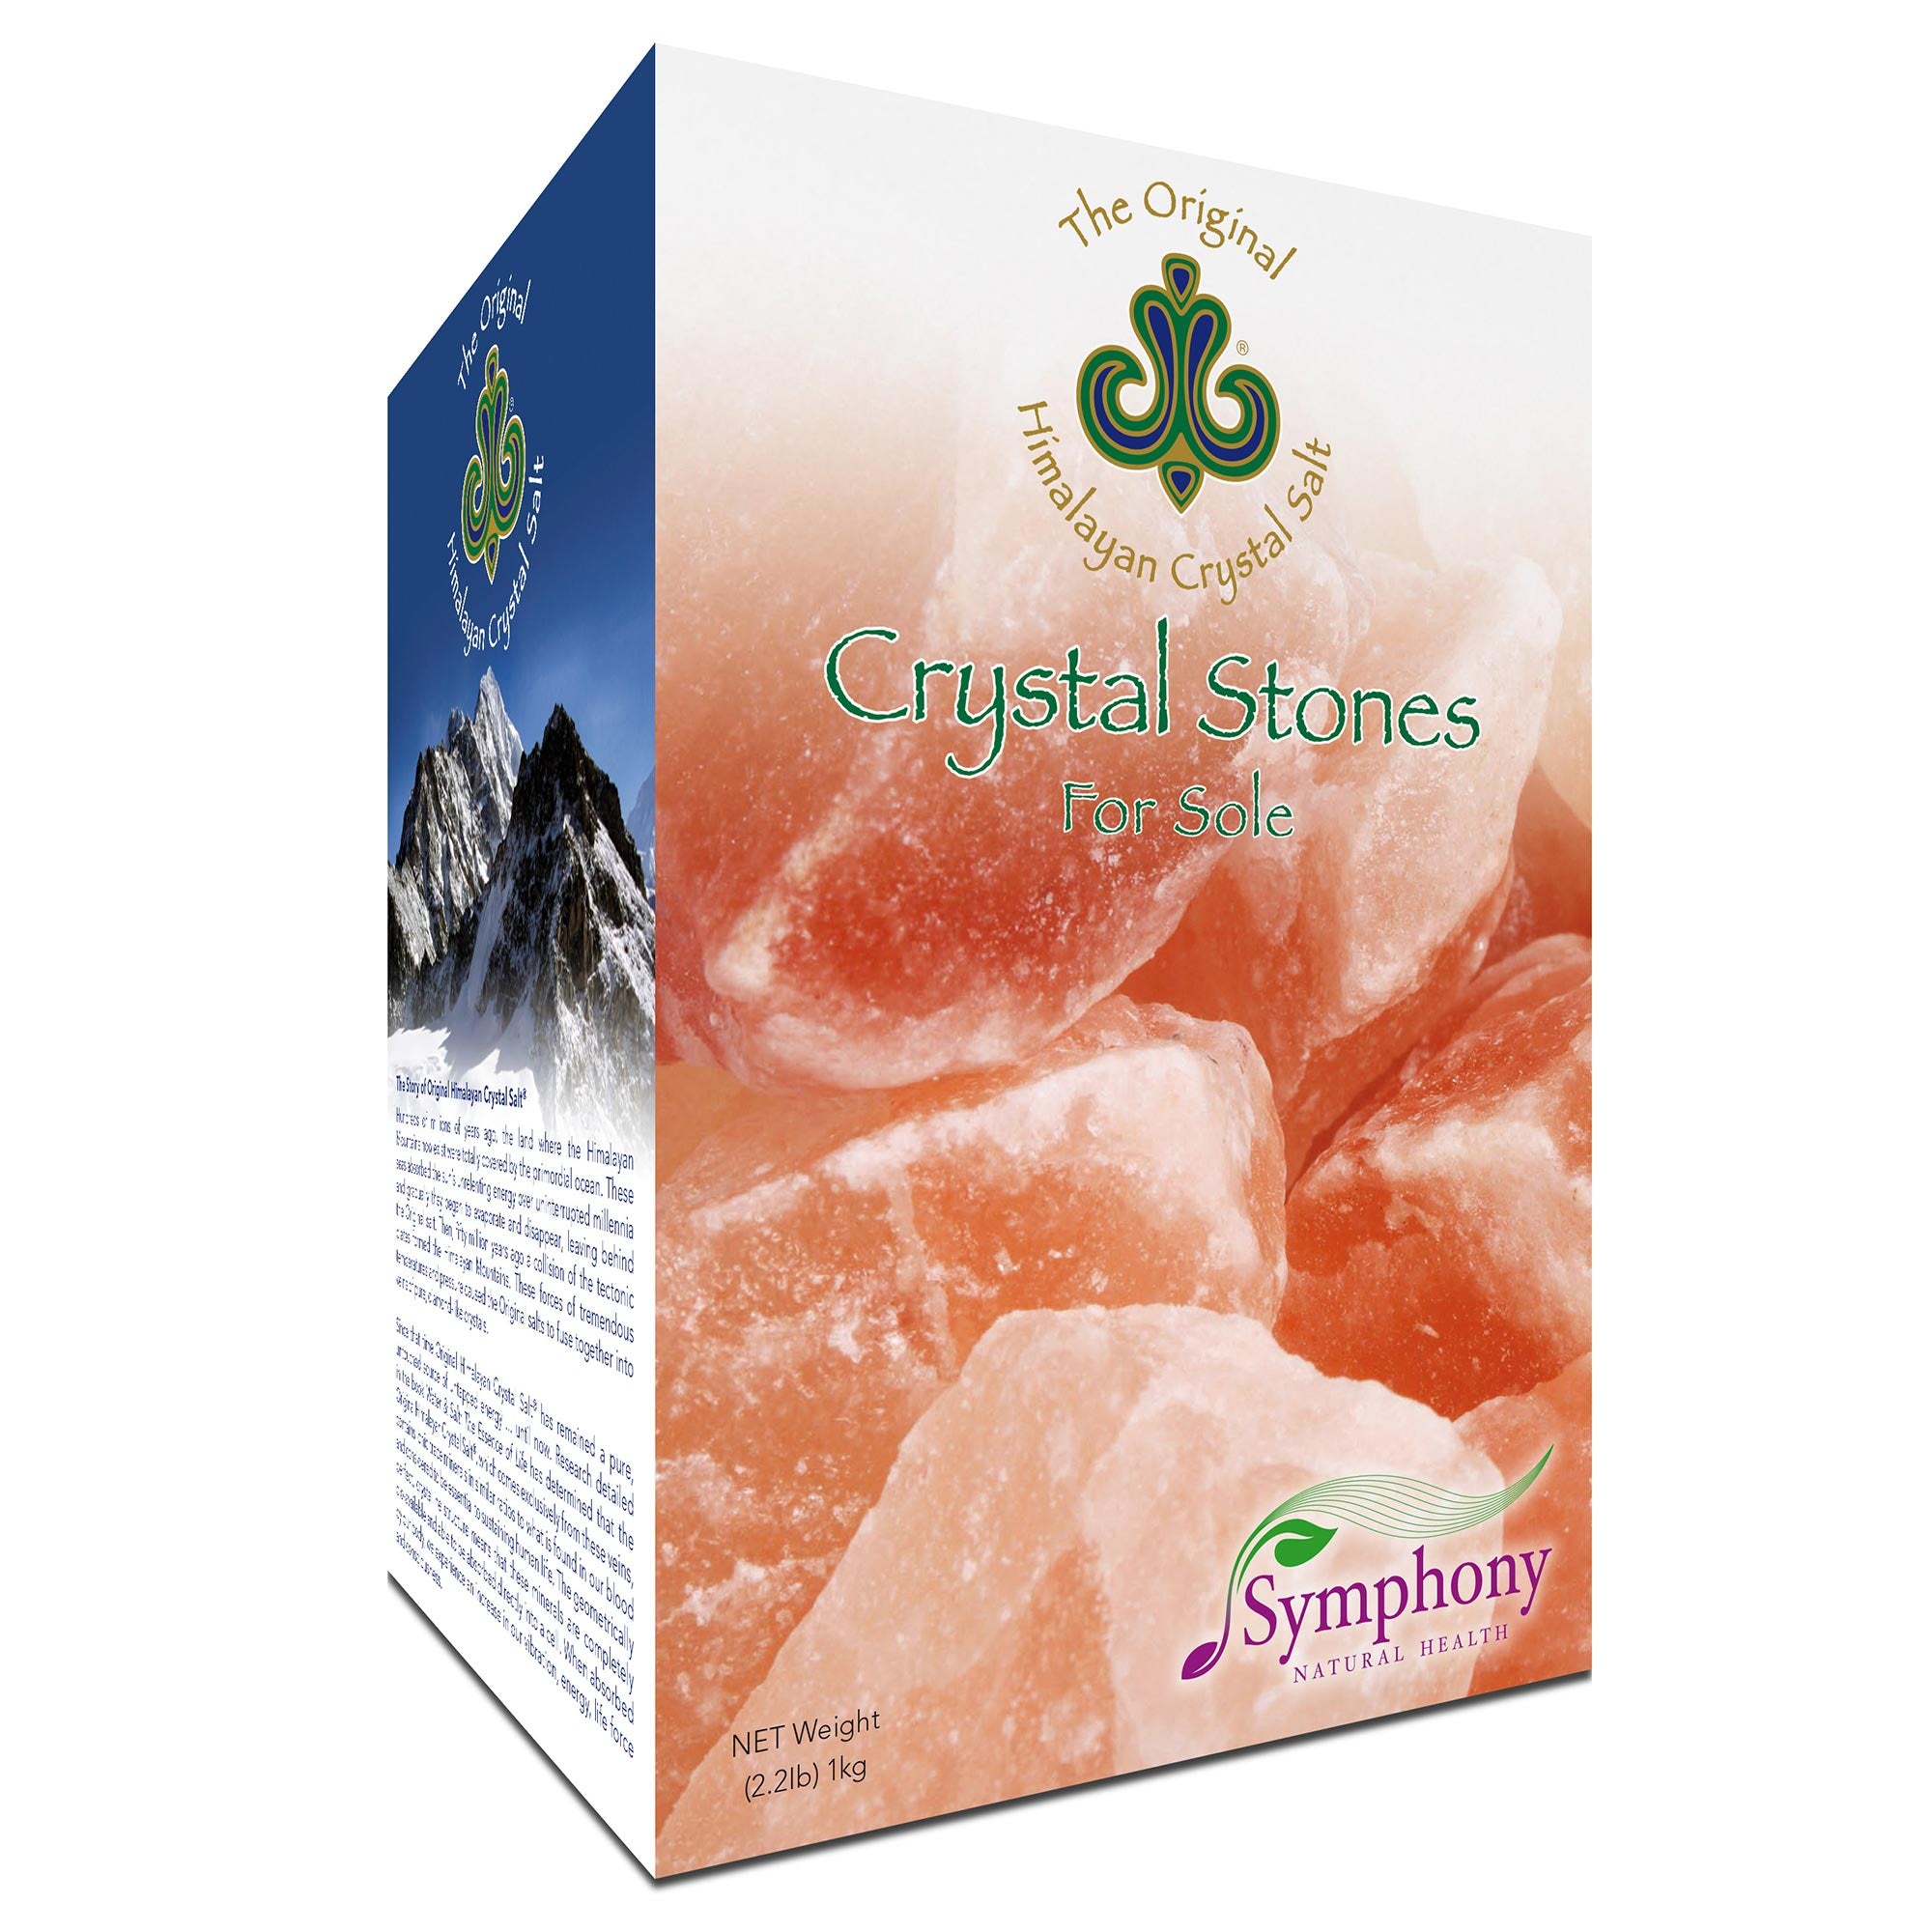 Crystal Salt Stones for Sole product box right-facing with Himalayan Crystal Salt stones and Himalayan Crystal Salt logo